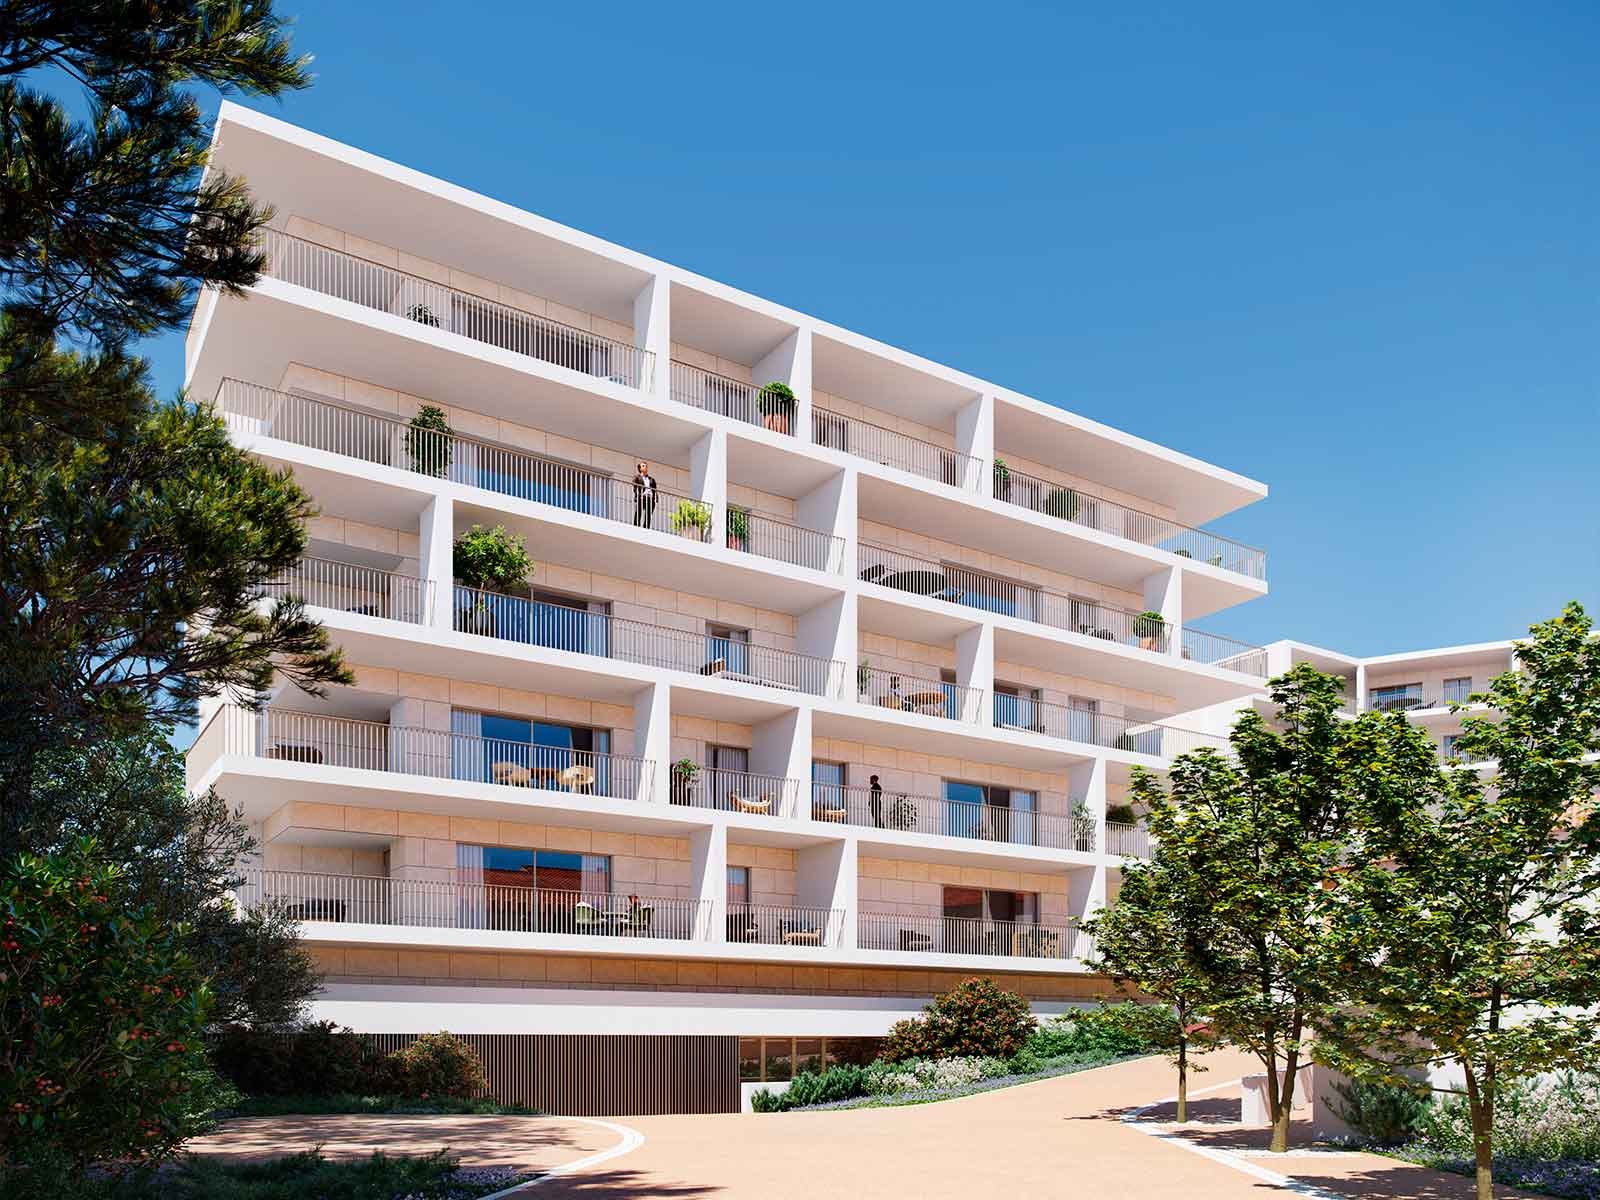 3 bedroom apartment with balcony and parking in new development, Lisbon 2265743450